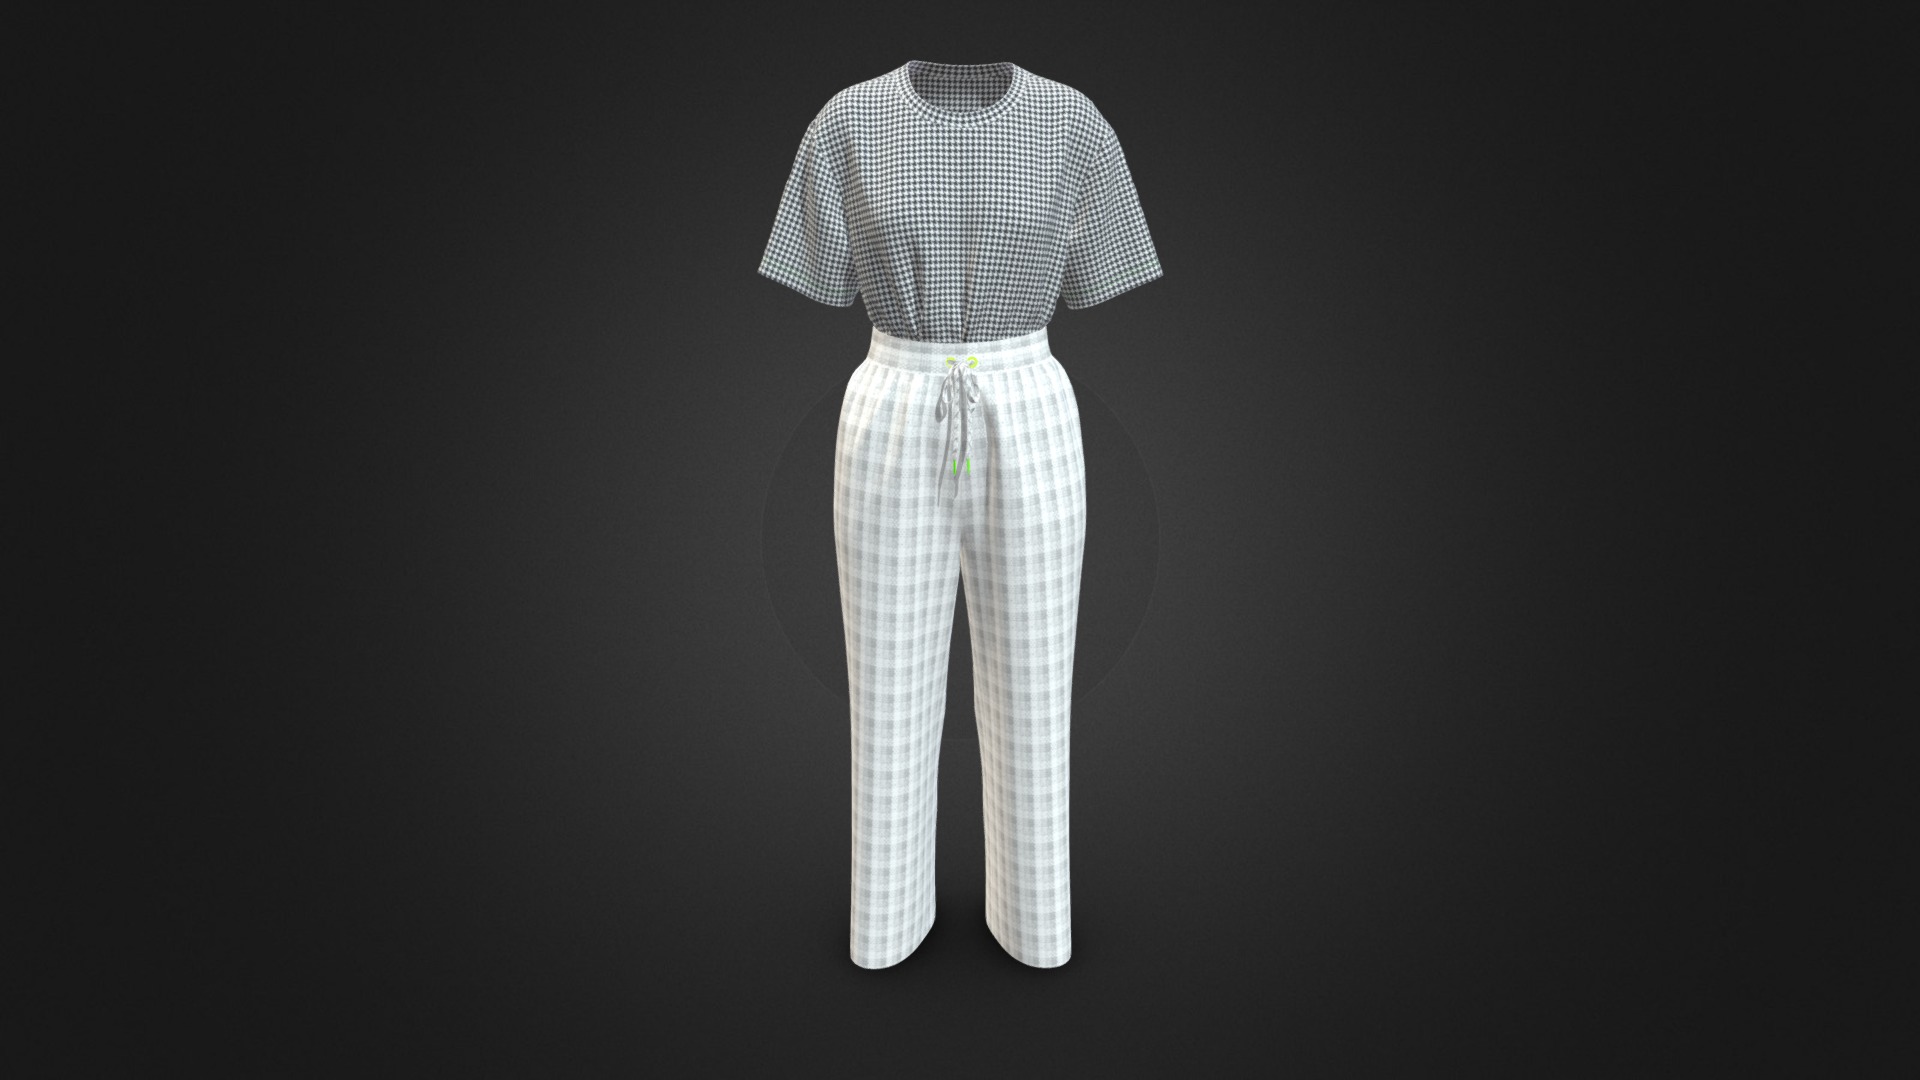 3D model Two Milewear Coordination - This is a 3D model of the Two Milewear Coordination. The 3D model is about a white and blue shirt.